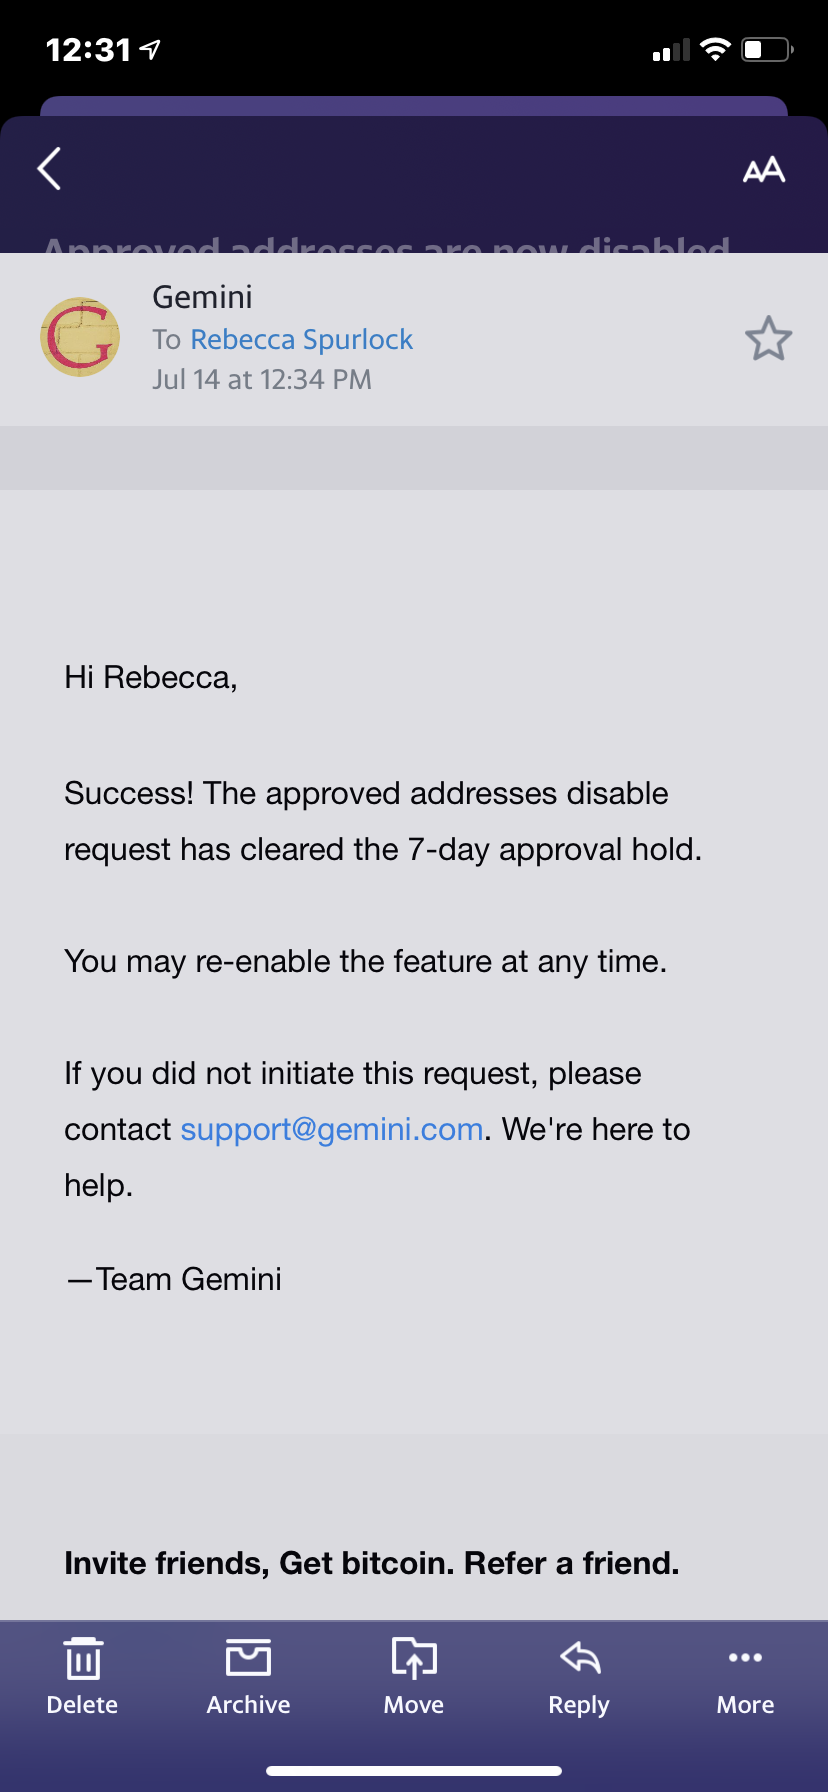 Gemini complaint On 71421 I found out I was hacked and Gemini deactivated MY Account